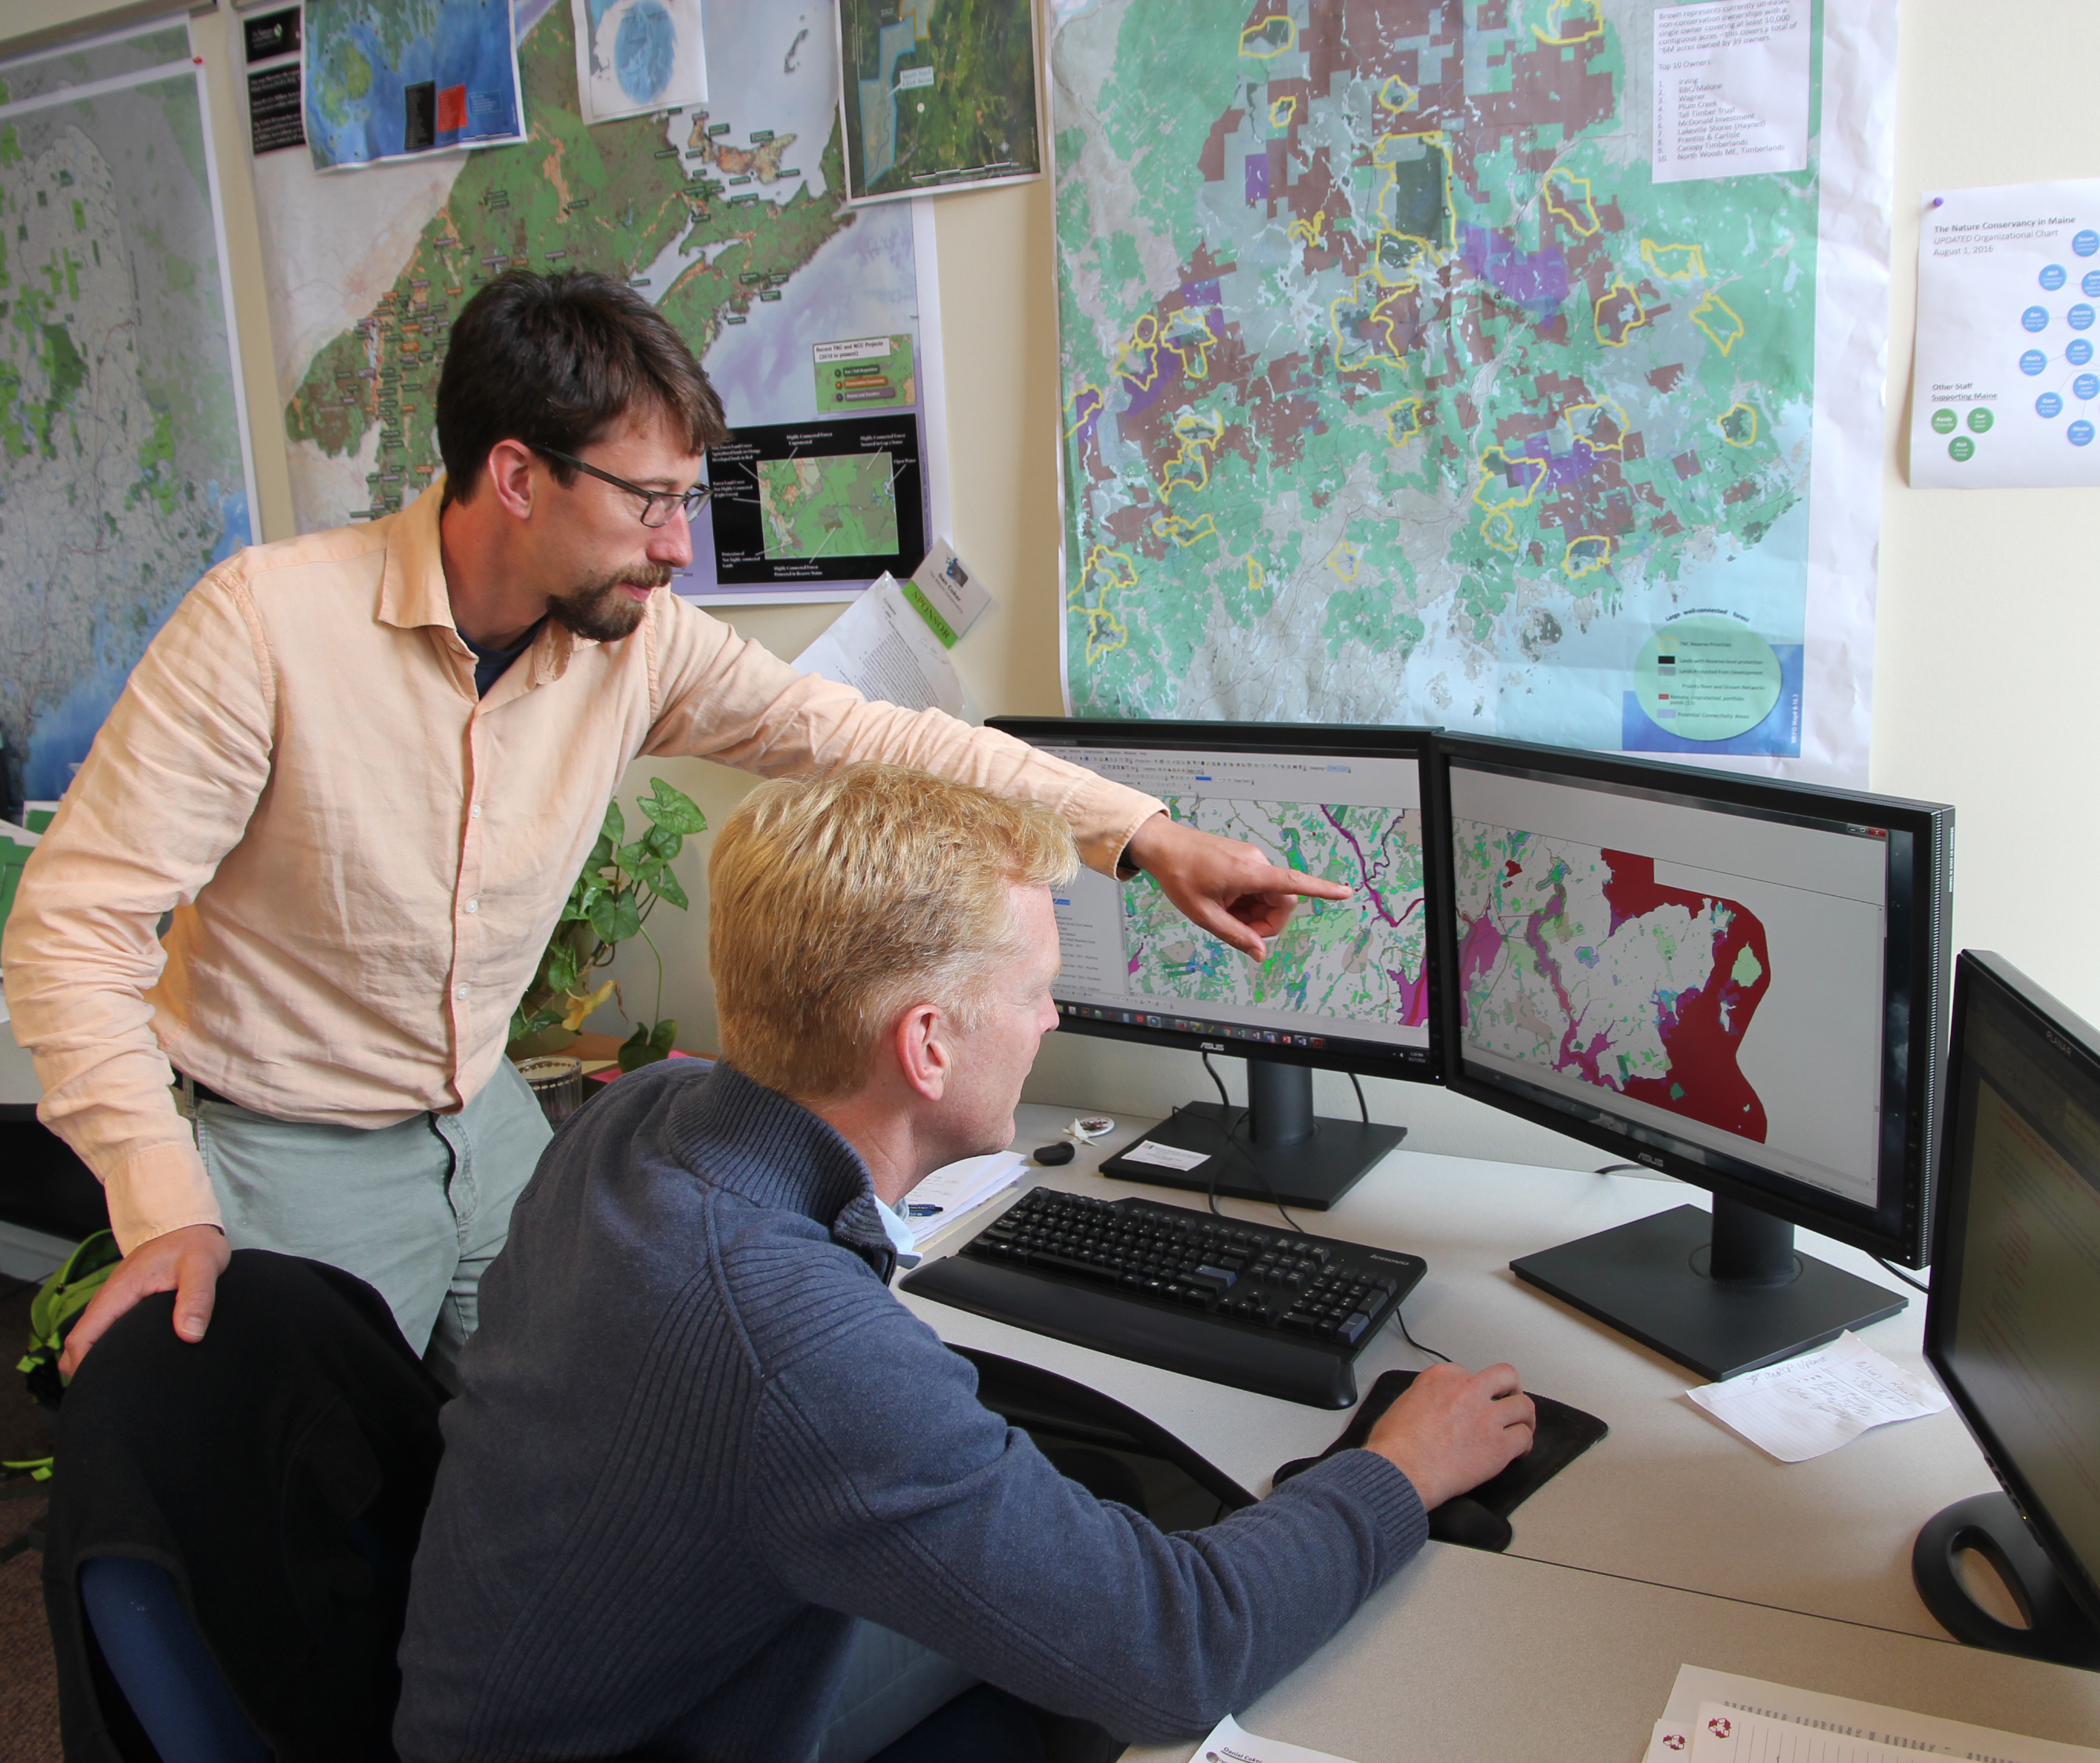 Two people work at a computer with mapping software visible.